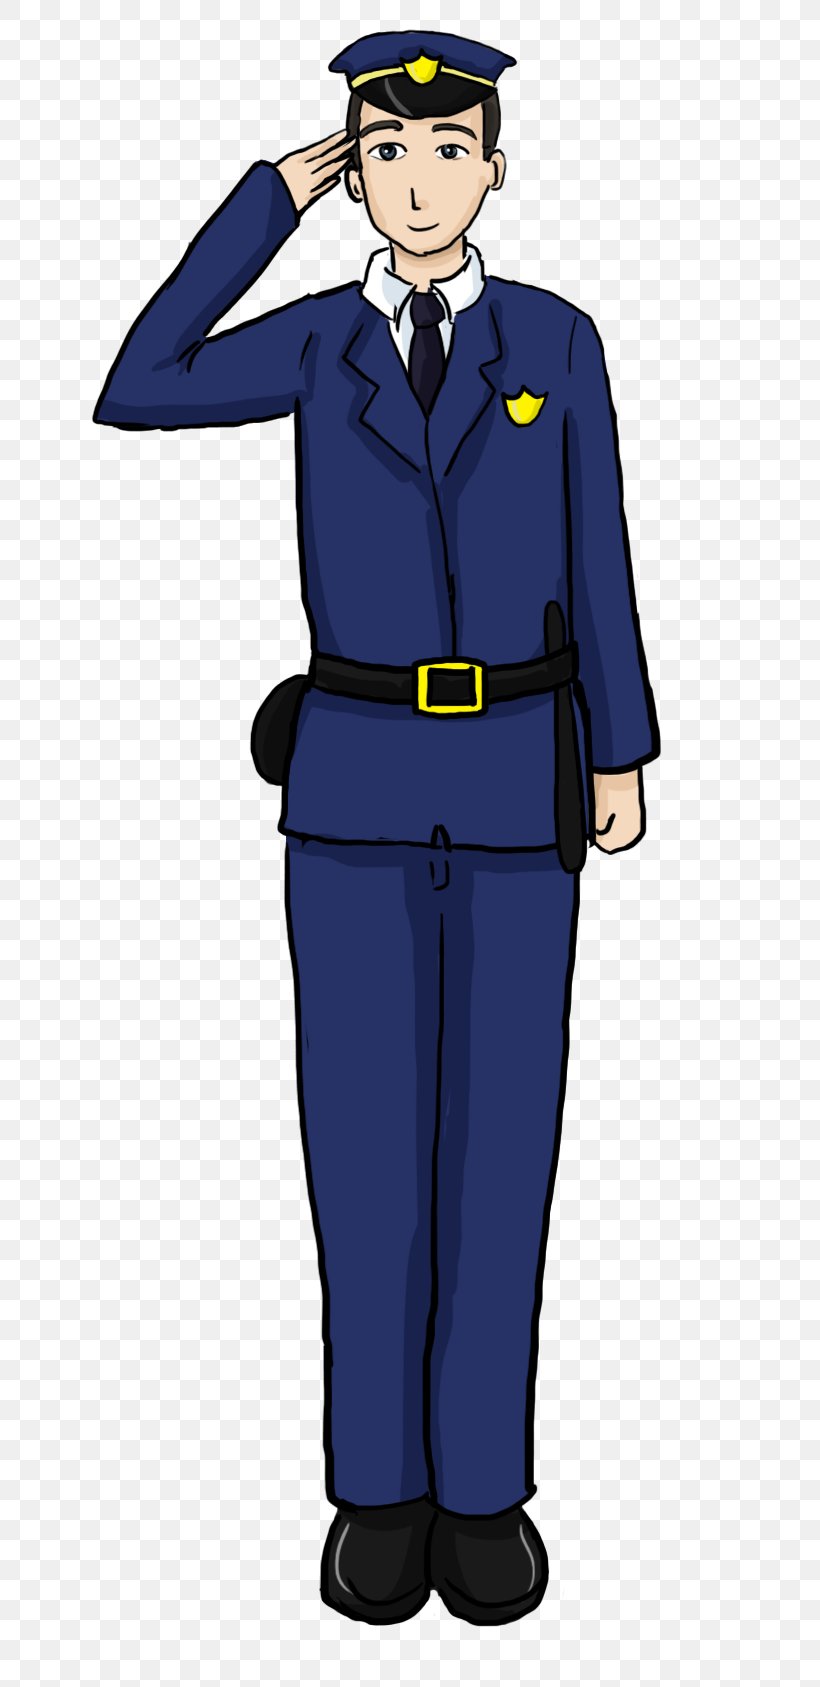 Police Officer Free Content Clip Art, PNG, 810x1687px, Police Officer, Badge, Cartoon, Copyright, Formal Wear Download Free